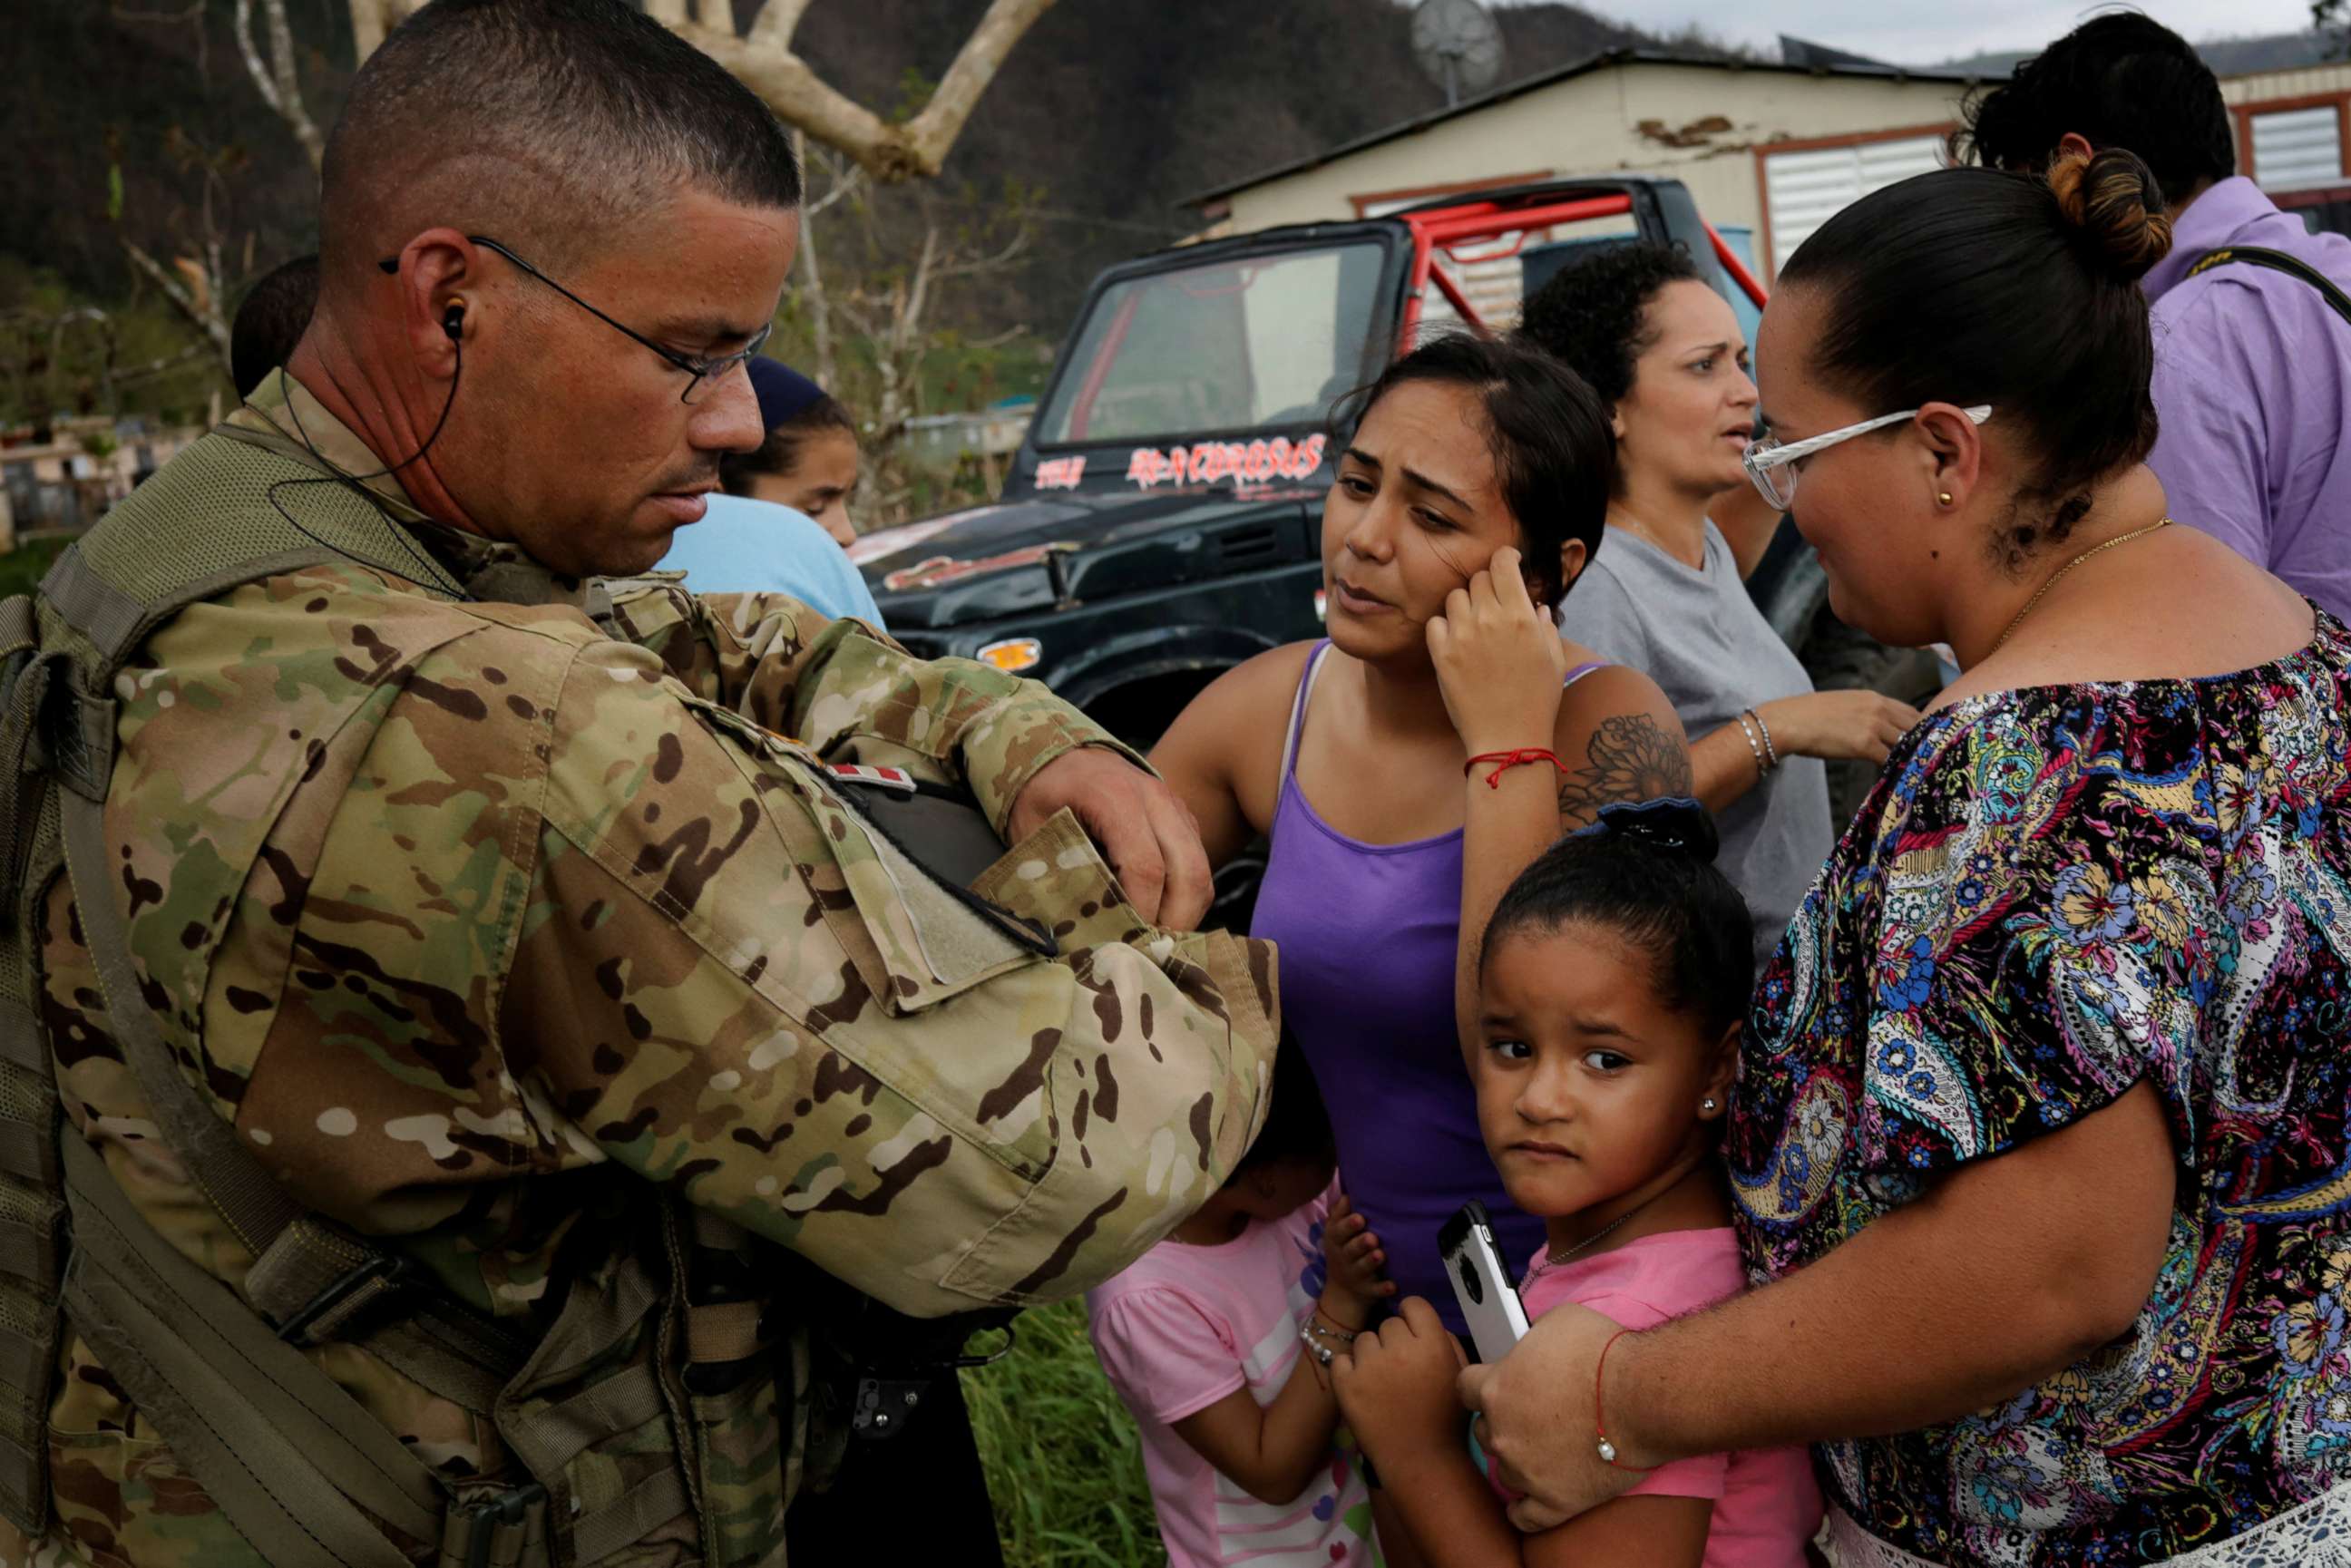 PHOTO: Sergeant First Class Eladio Tirado from the First Armored Division's Combat Aviation Brigade, who is from Puerto Rico, speaks with residents as he helps during recovery efforts following Hurricane Maria, in San Lorenzo, Puerto Rico, Oct. 7, 2017.